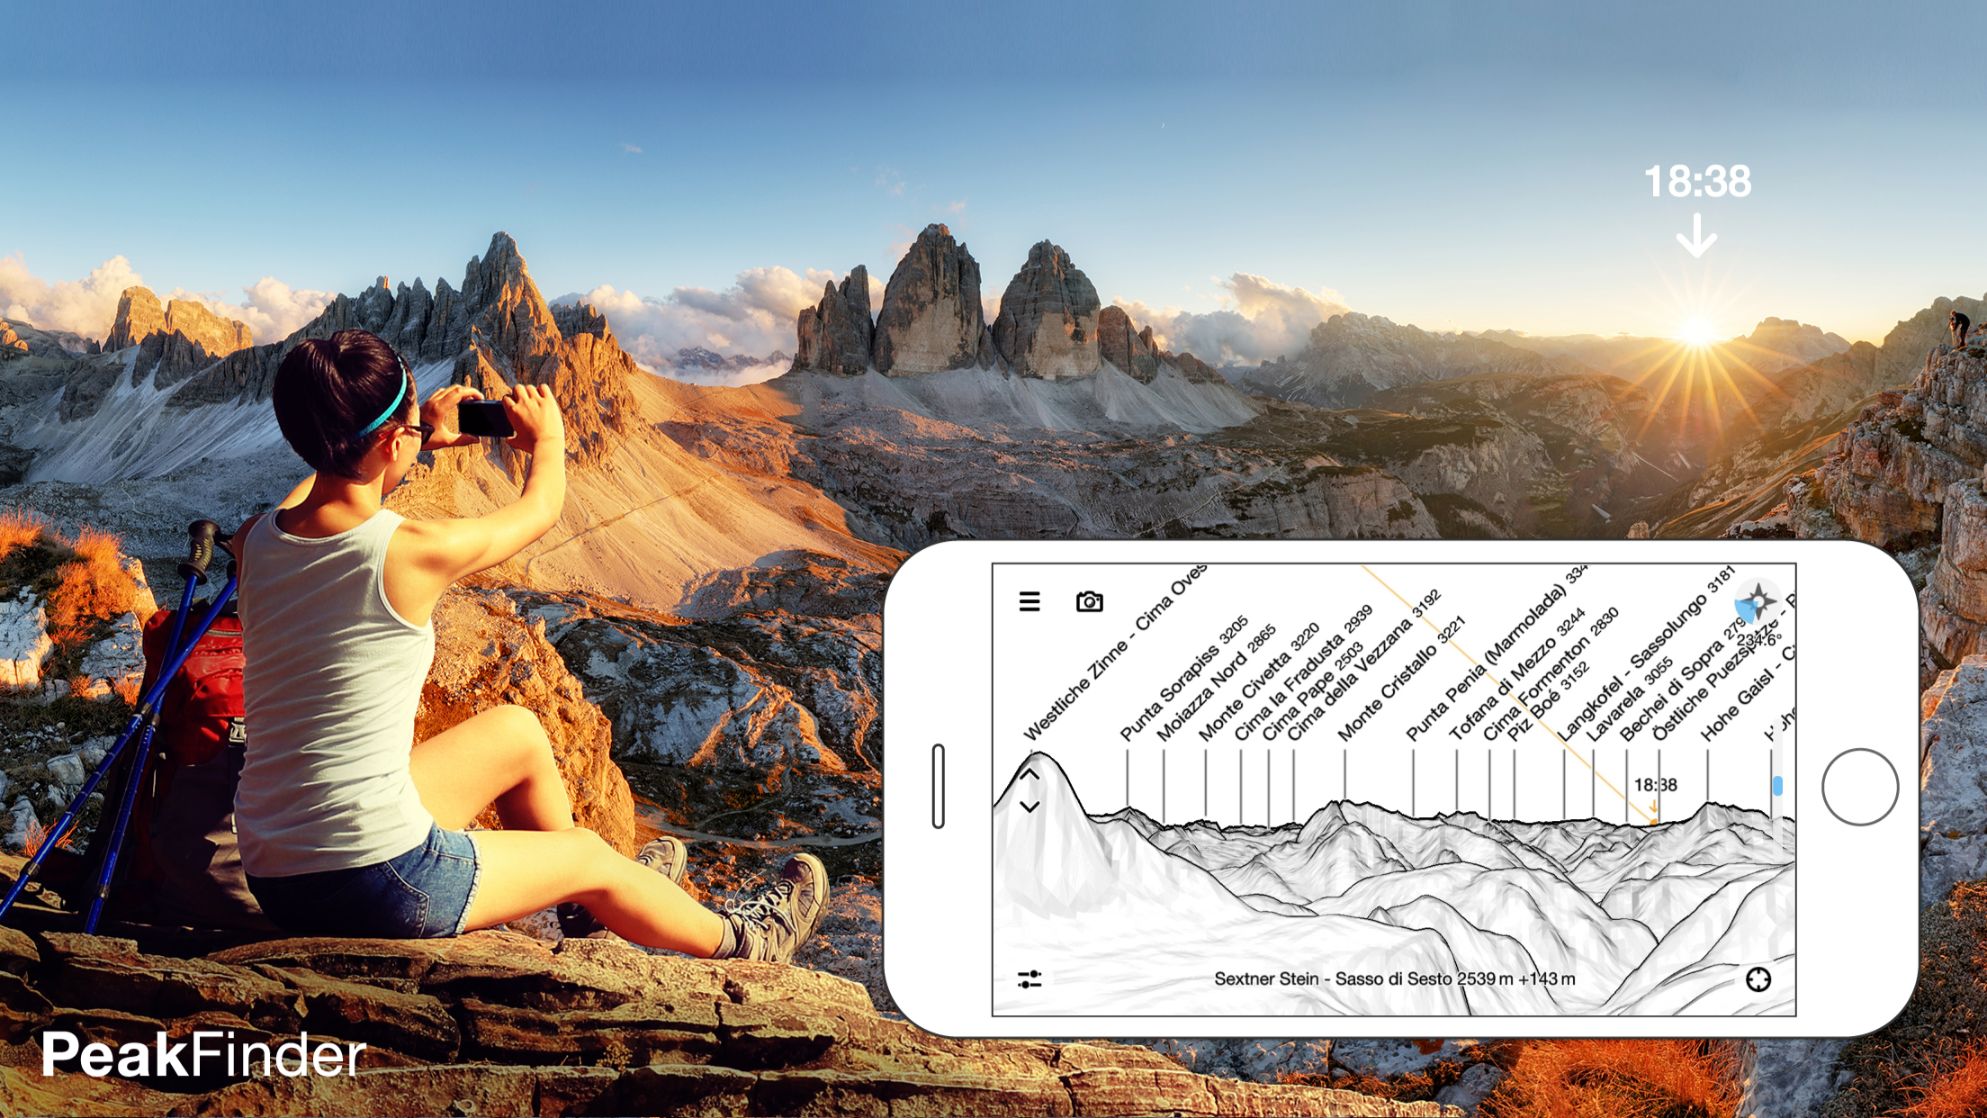 A PeakFinder poster, showing how mountain peaks appear on the phone when pointed at a mountain range. Photo: PeakFinder